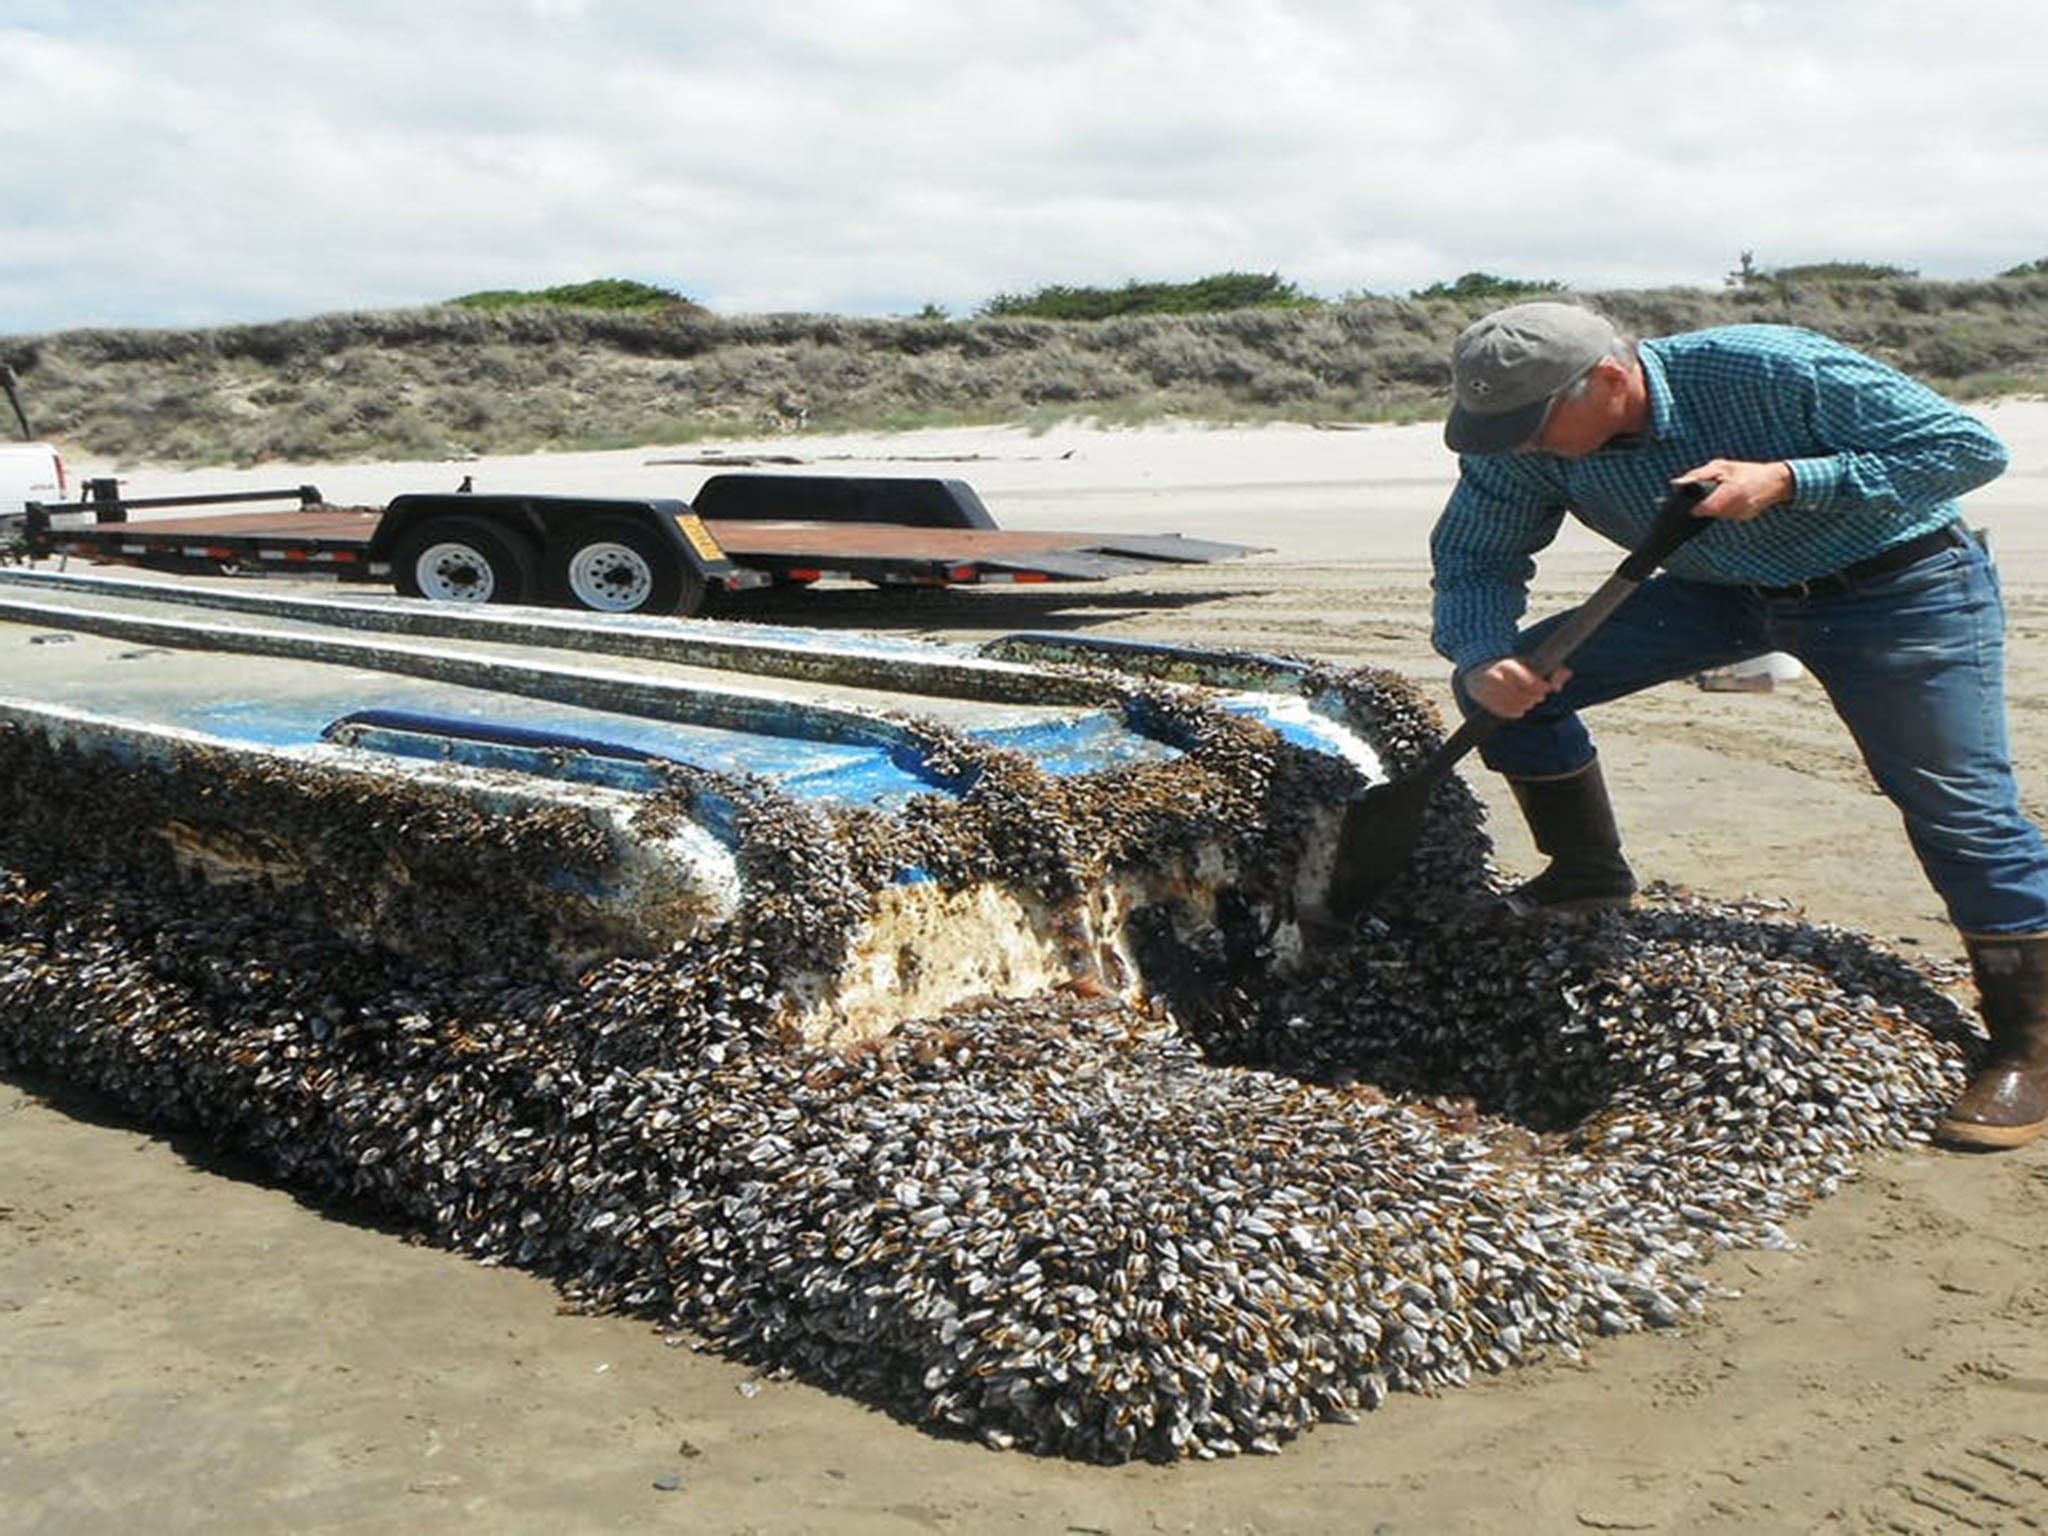 A Japanese vessel washed ashore on the coast of Washington state is covered in barnacles